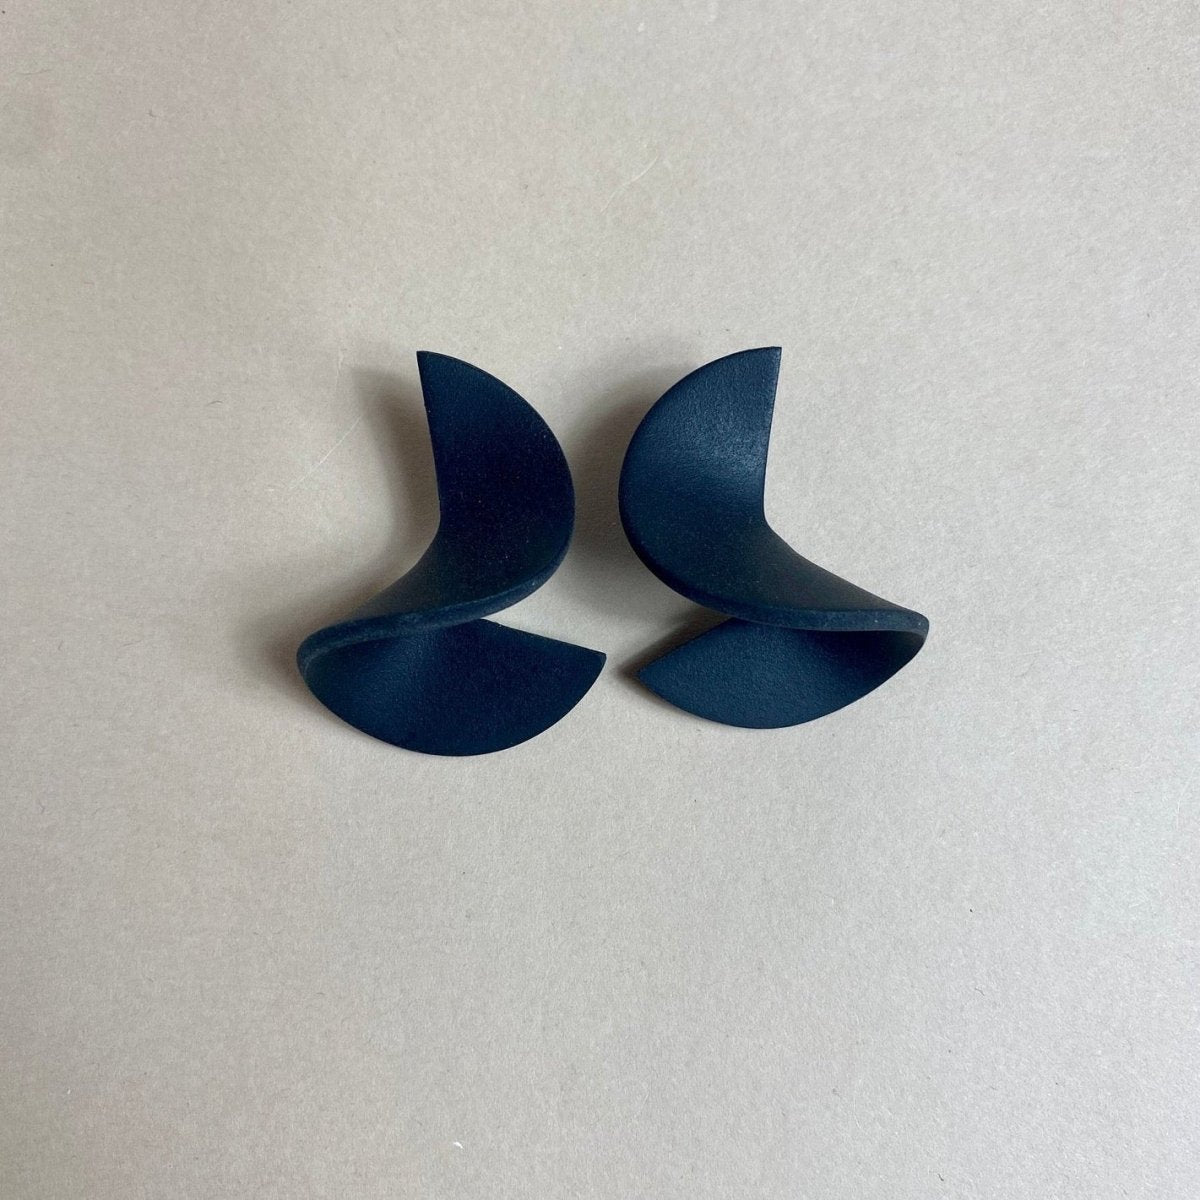 A polymer clay stud earring folded into a small wave. The Modern Crinkle Earrings in Black are designed and handcrafted by Little Pieces Jewelry in Los Angeles, California.